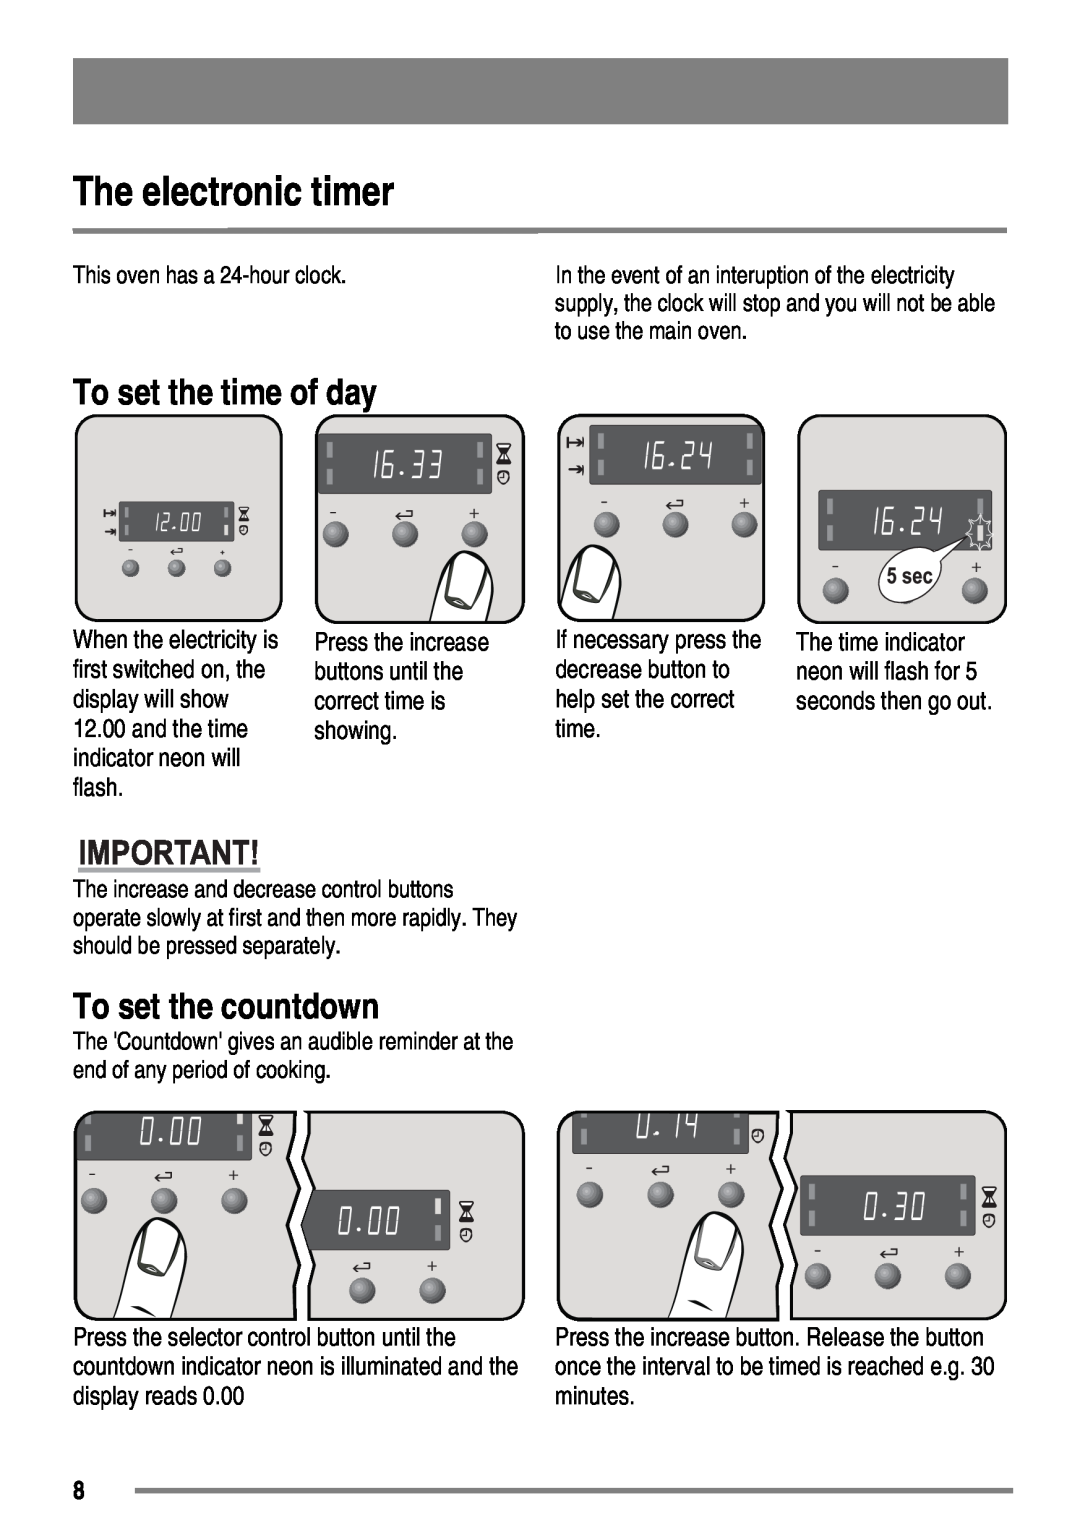 Zanussi ZKC6020 user manual The electronic timer, To set the time of day, To set the countdown 